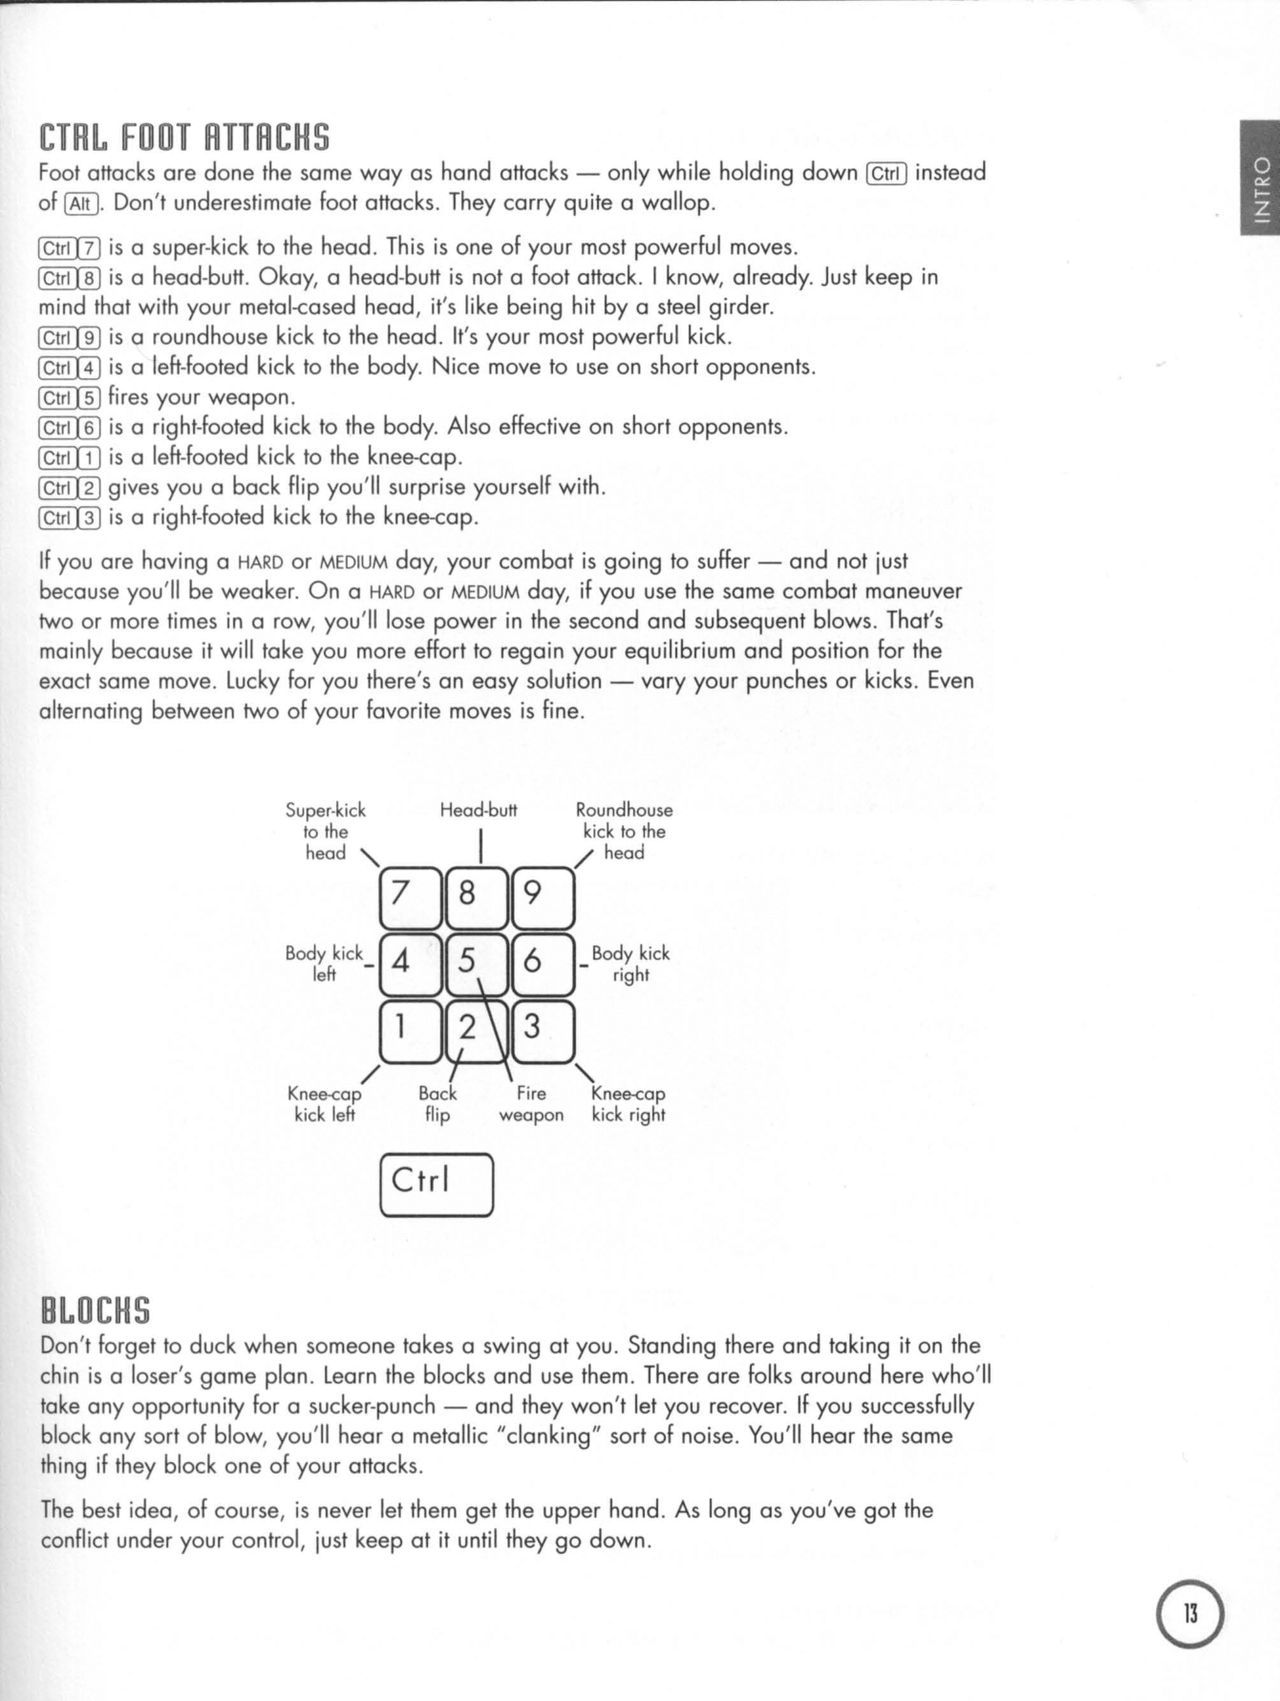 BioForge (PC (DOS/Windows)) Strategy Guide 14